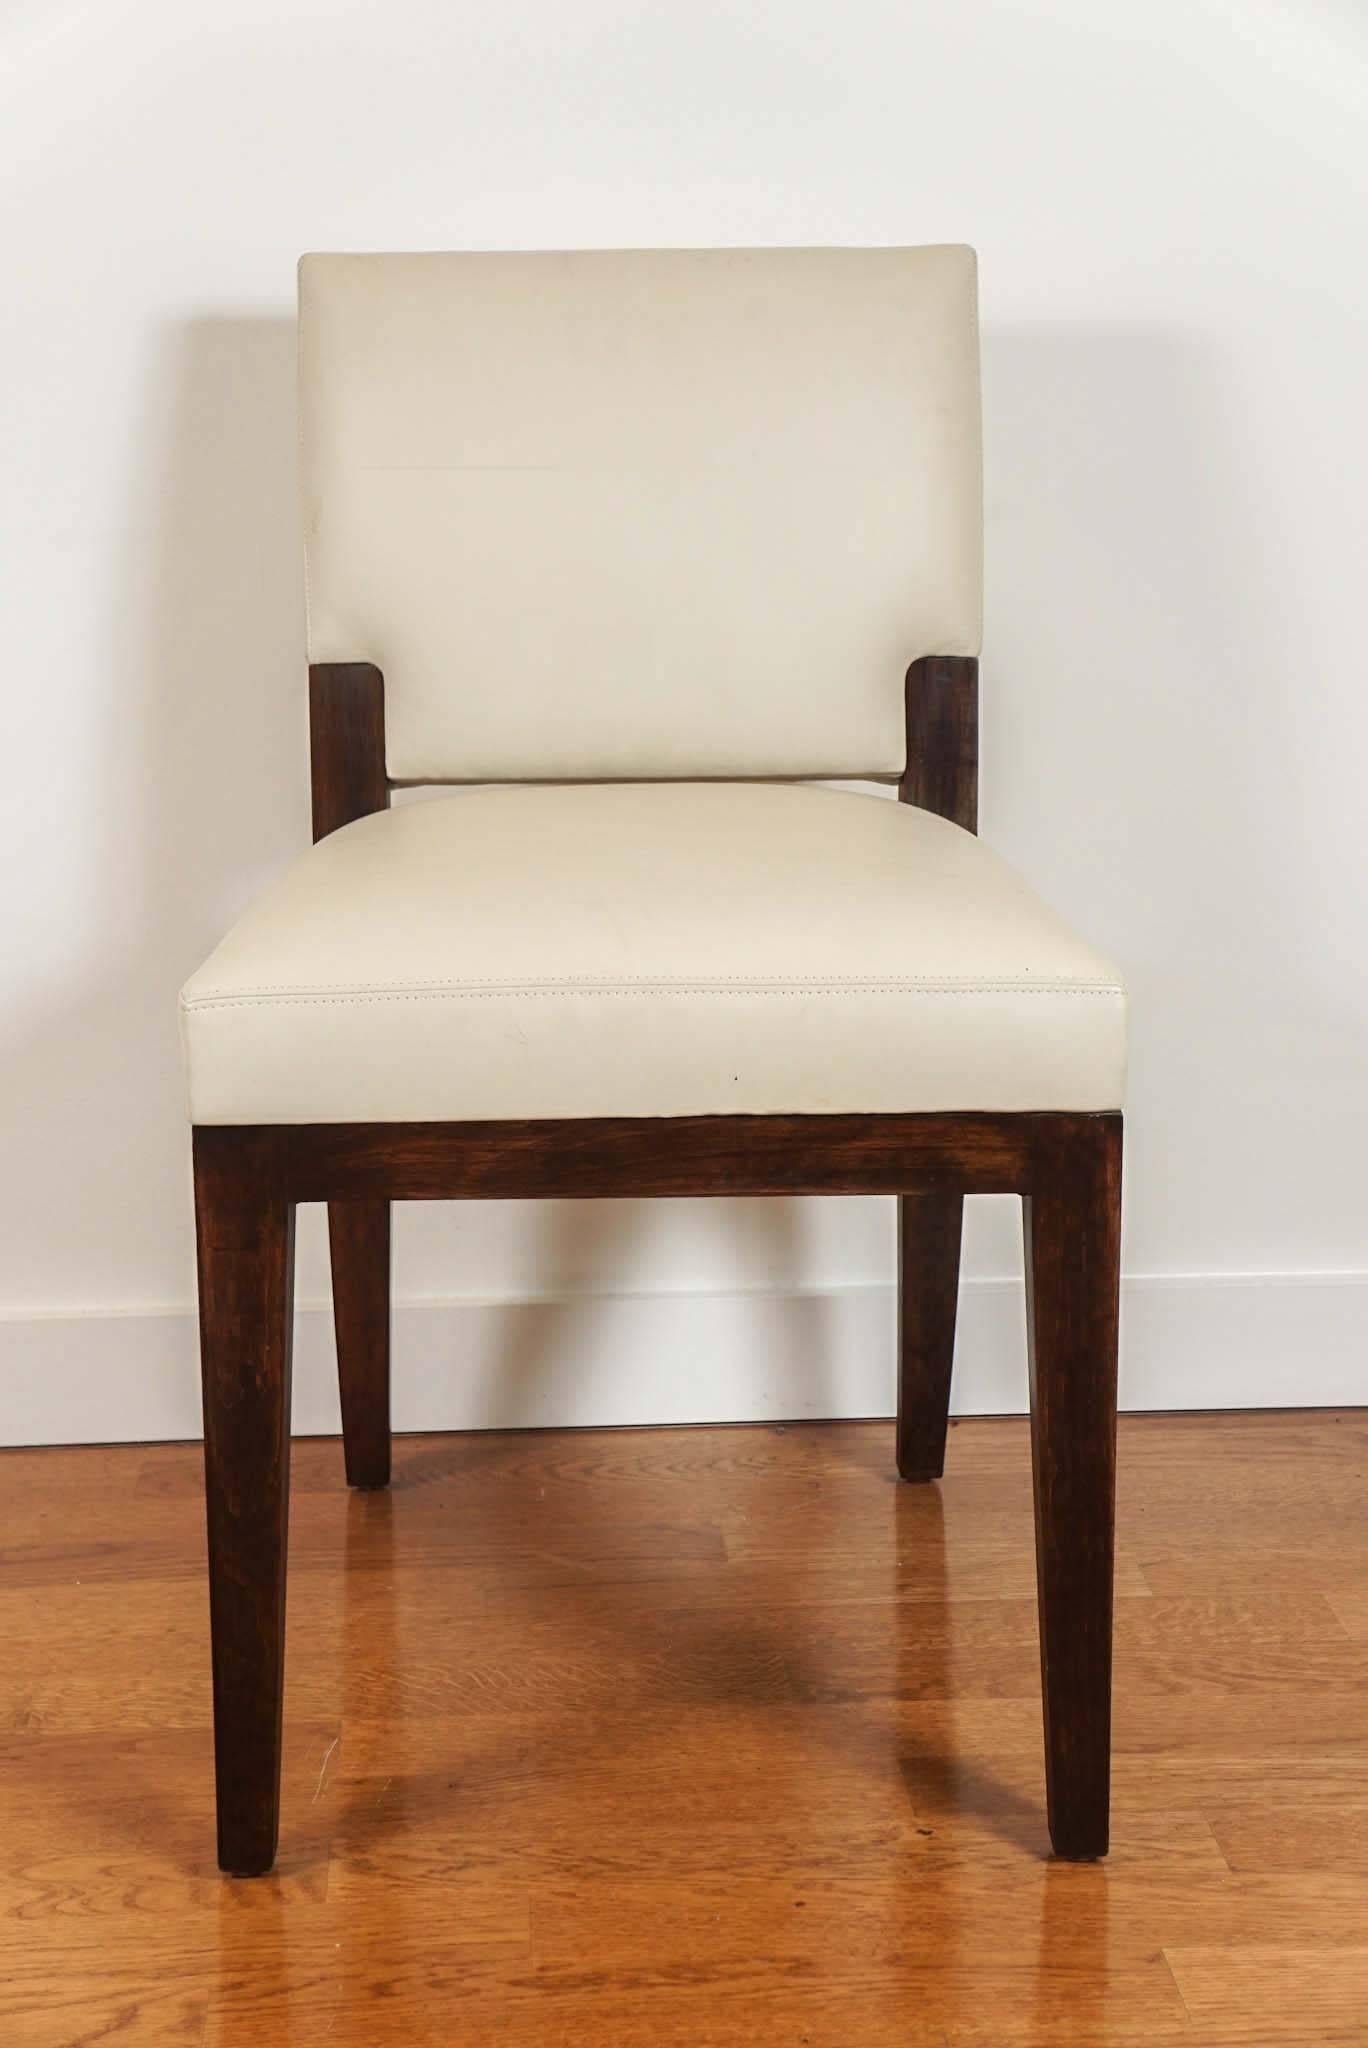 Wood, dining chair, with cream leather upholstery.